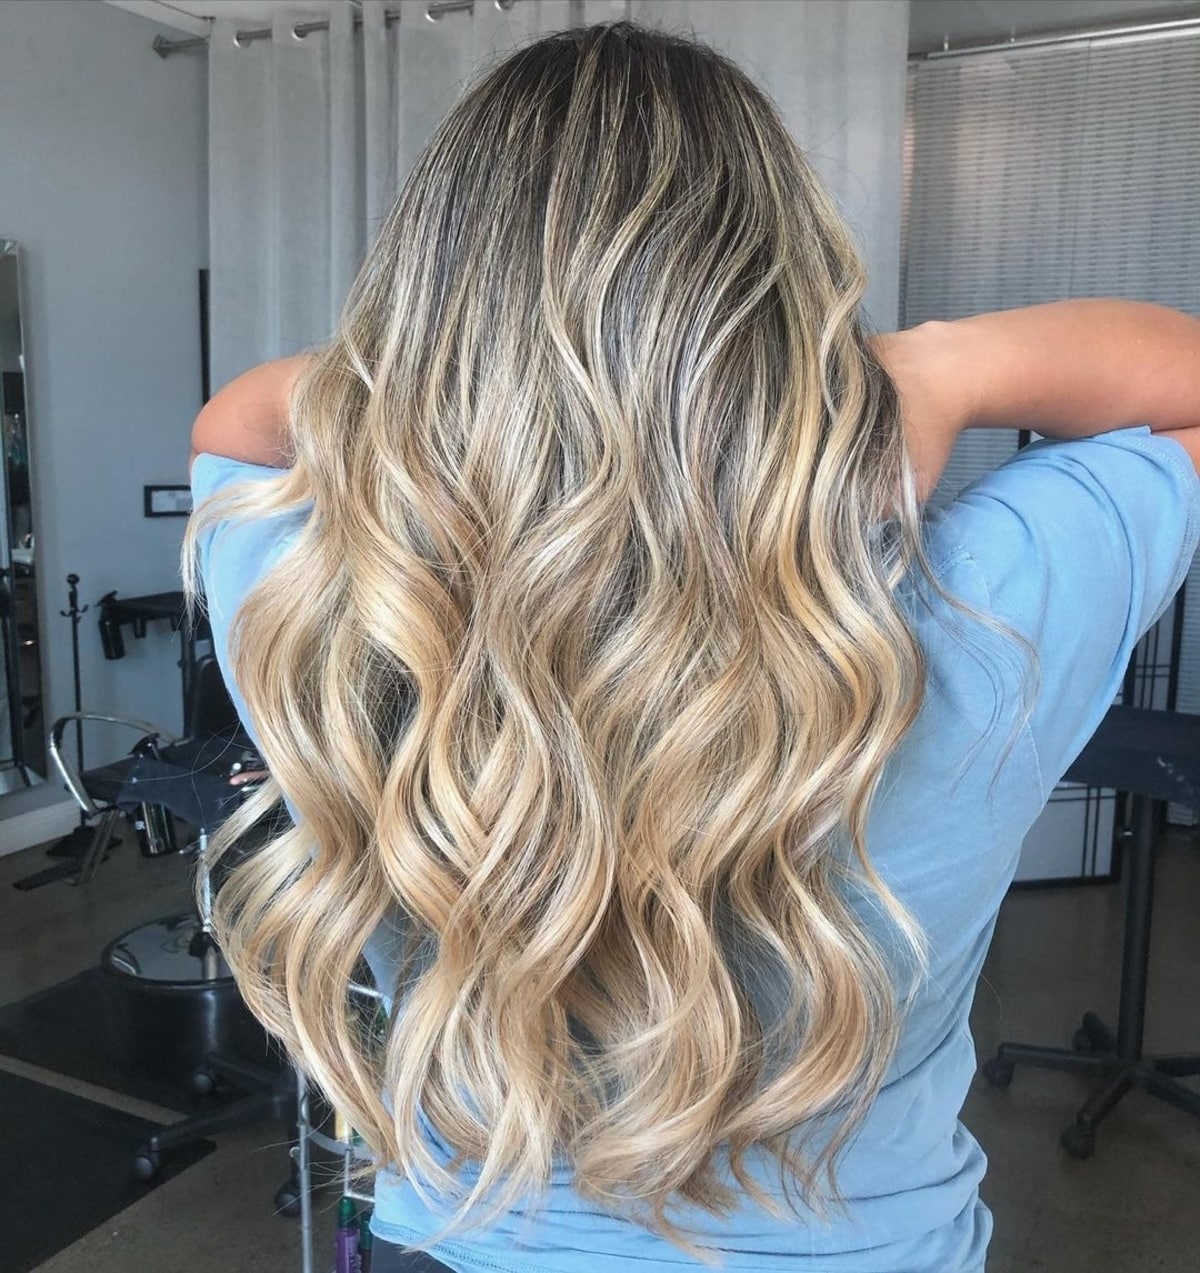 Stunning Long Beach Waves with Ombre